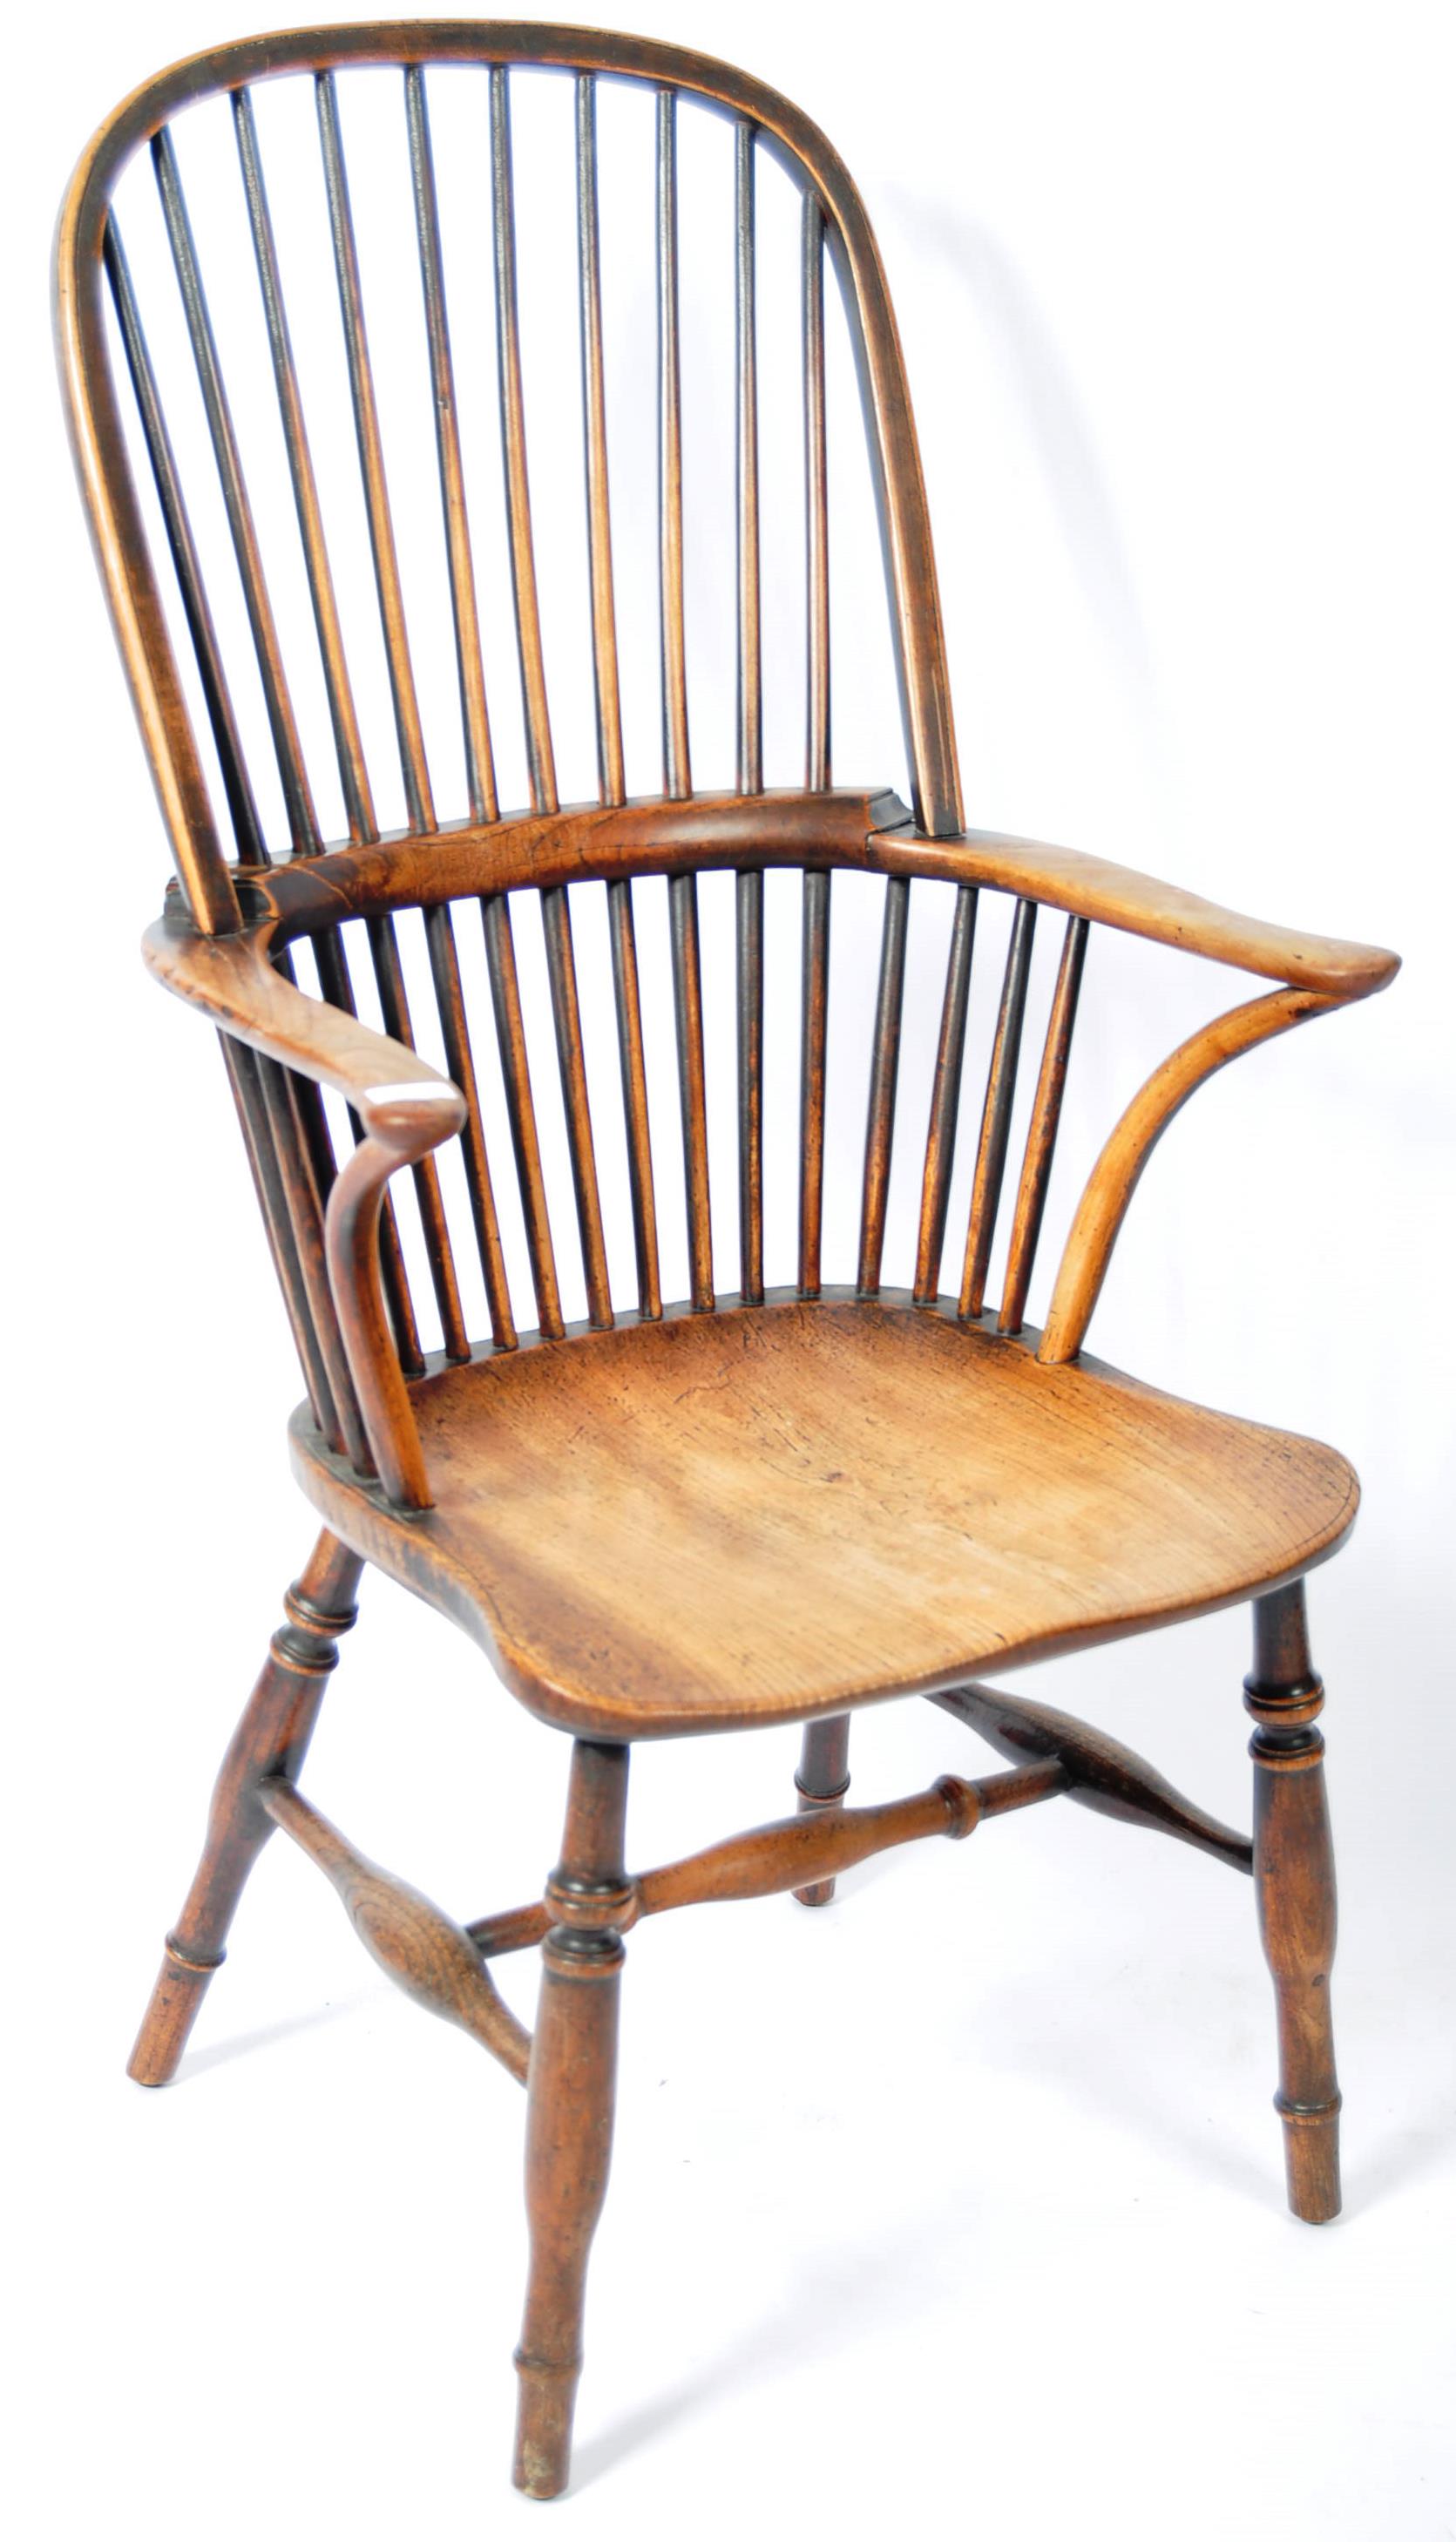 19TH CENTURY ENGLISH ANTIQUE BEECH AND ELM WINDSOR CHAIR - Image 2 of 7